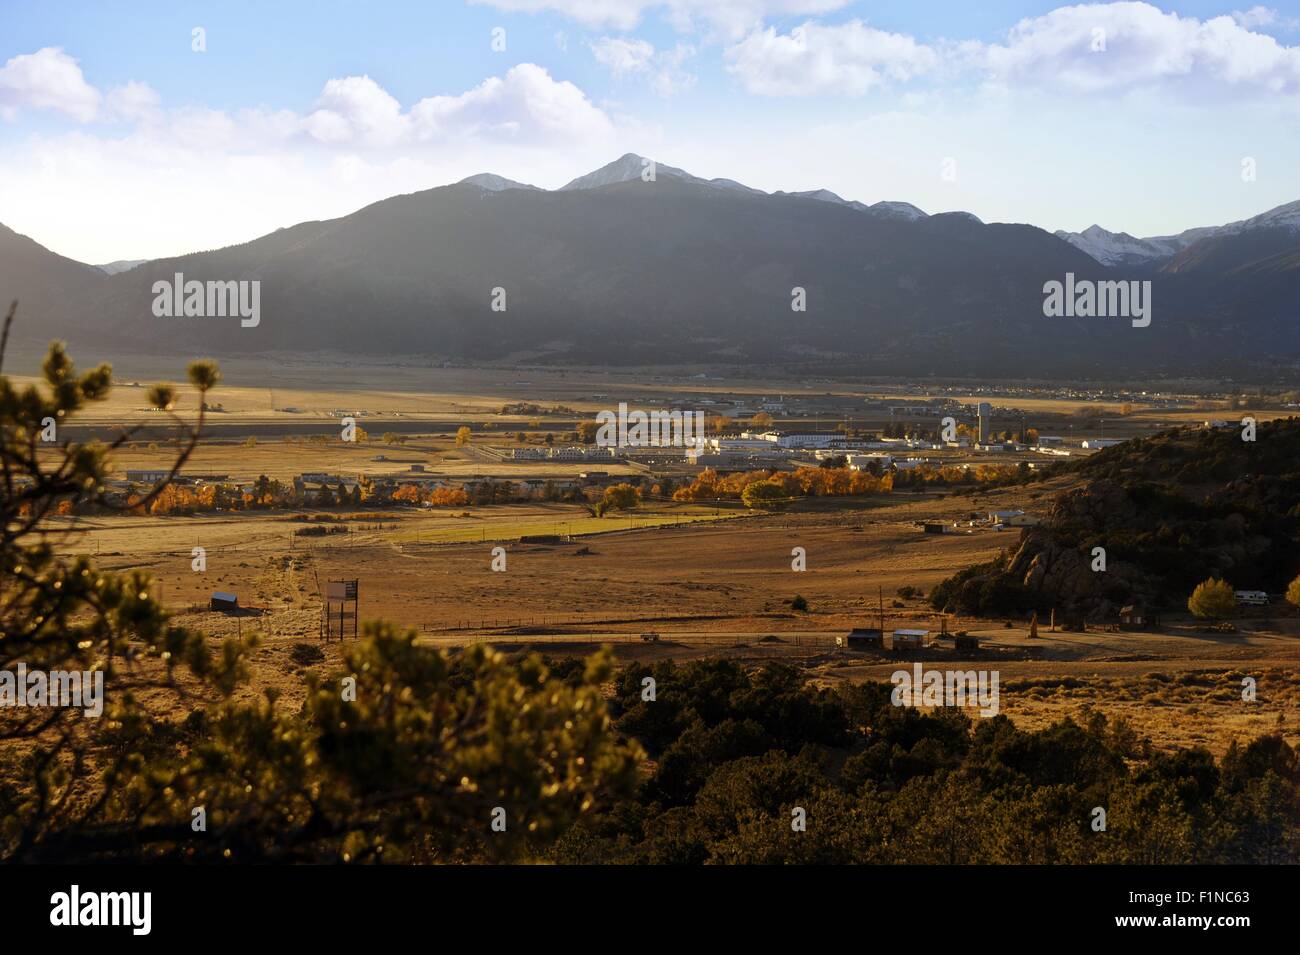 Buena Vista, CO Panorama. Buena Vista is a Statutory Town in Chaffee County, Colorado, U.S.A. Cities Photography Collection. Stock Photo